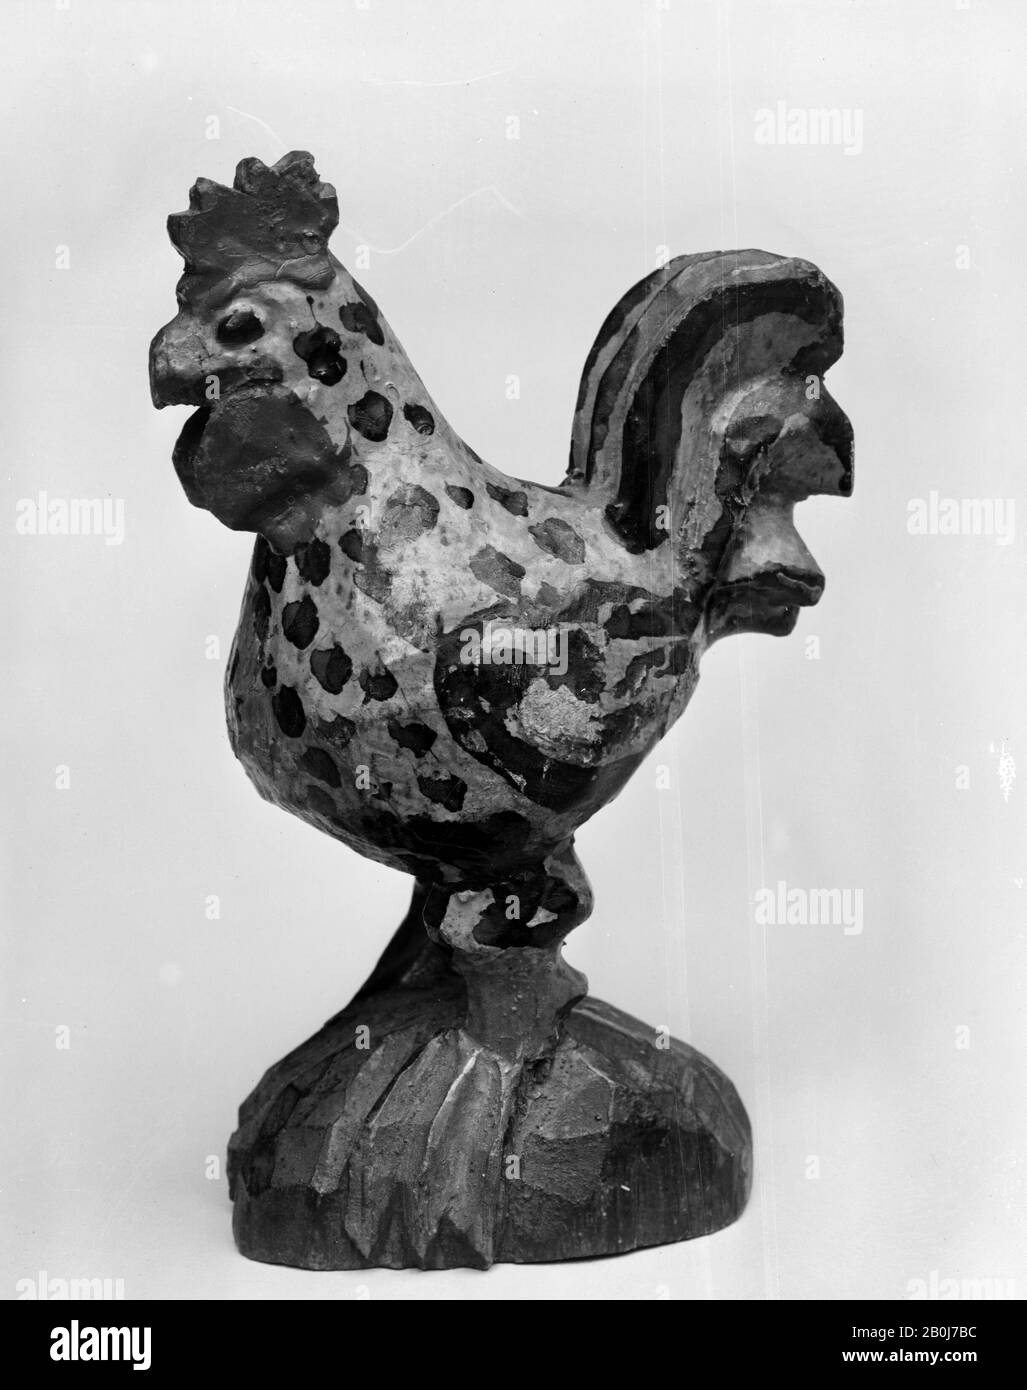 Attributed to Wilhelm Schimmel, Rooster, American, Attributed to Wilhelm Schimmel (probably 1817–1890), 1865–90, Made in Cumberland County, Pennsylvania, United States, American, White pine, 5 1/4 in. H. (13.34 cm), Sculpture Stock Photo